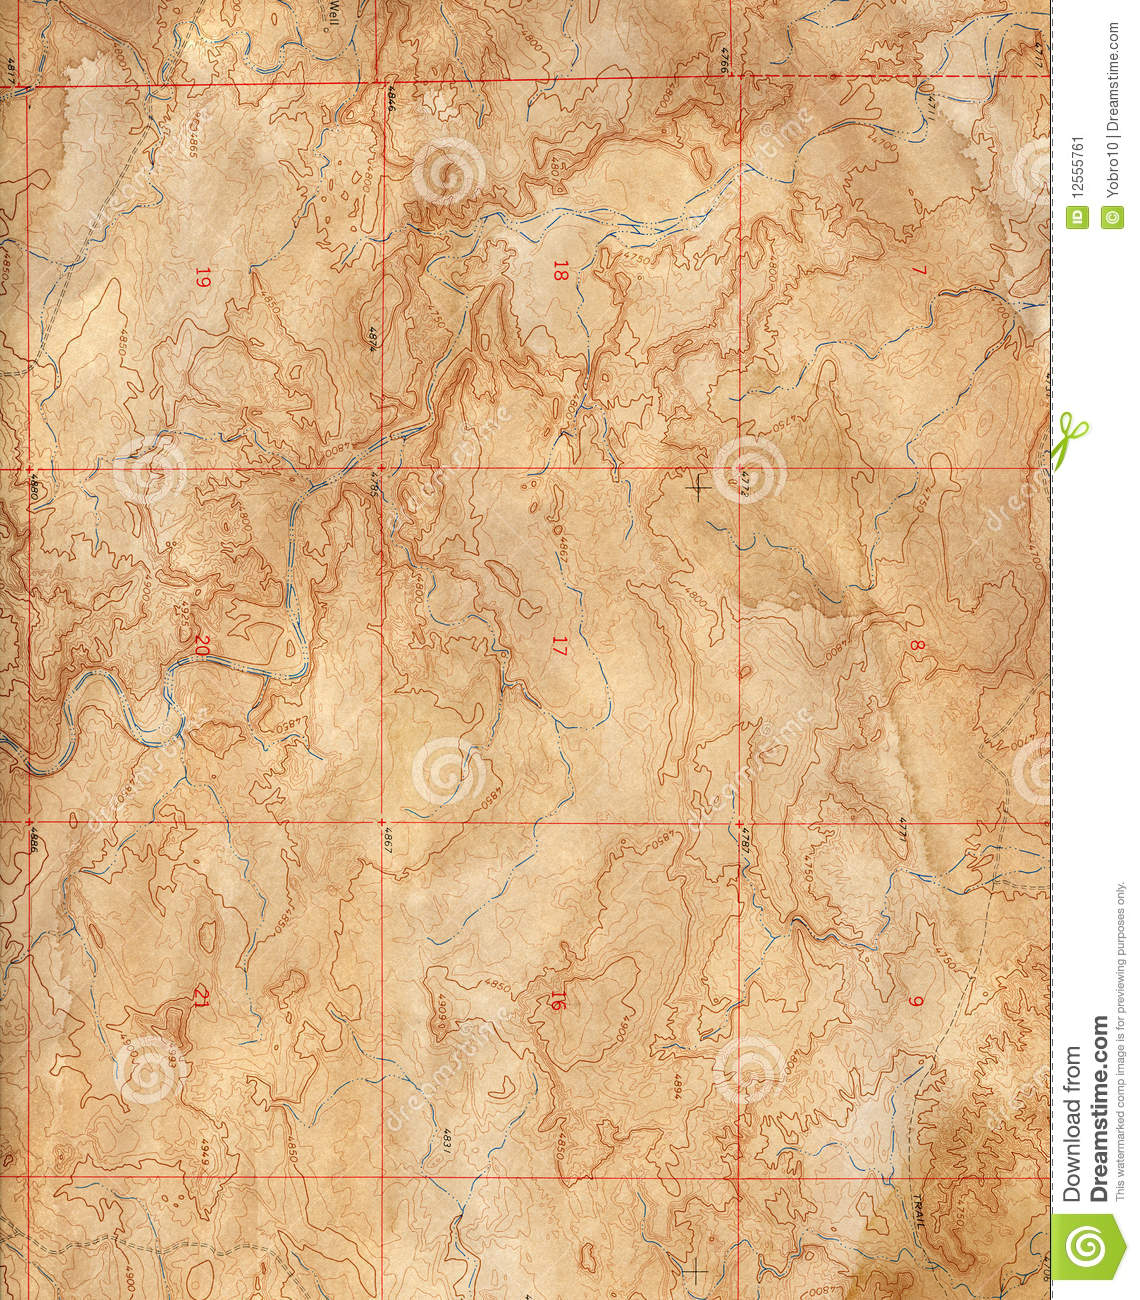 Old Map Background Images amp Pictures   Becuo